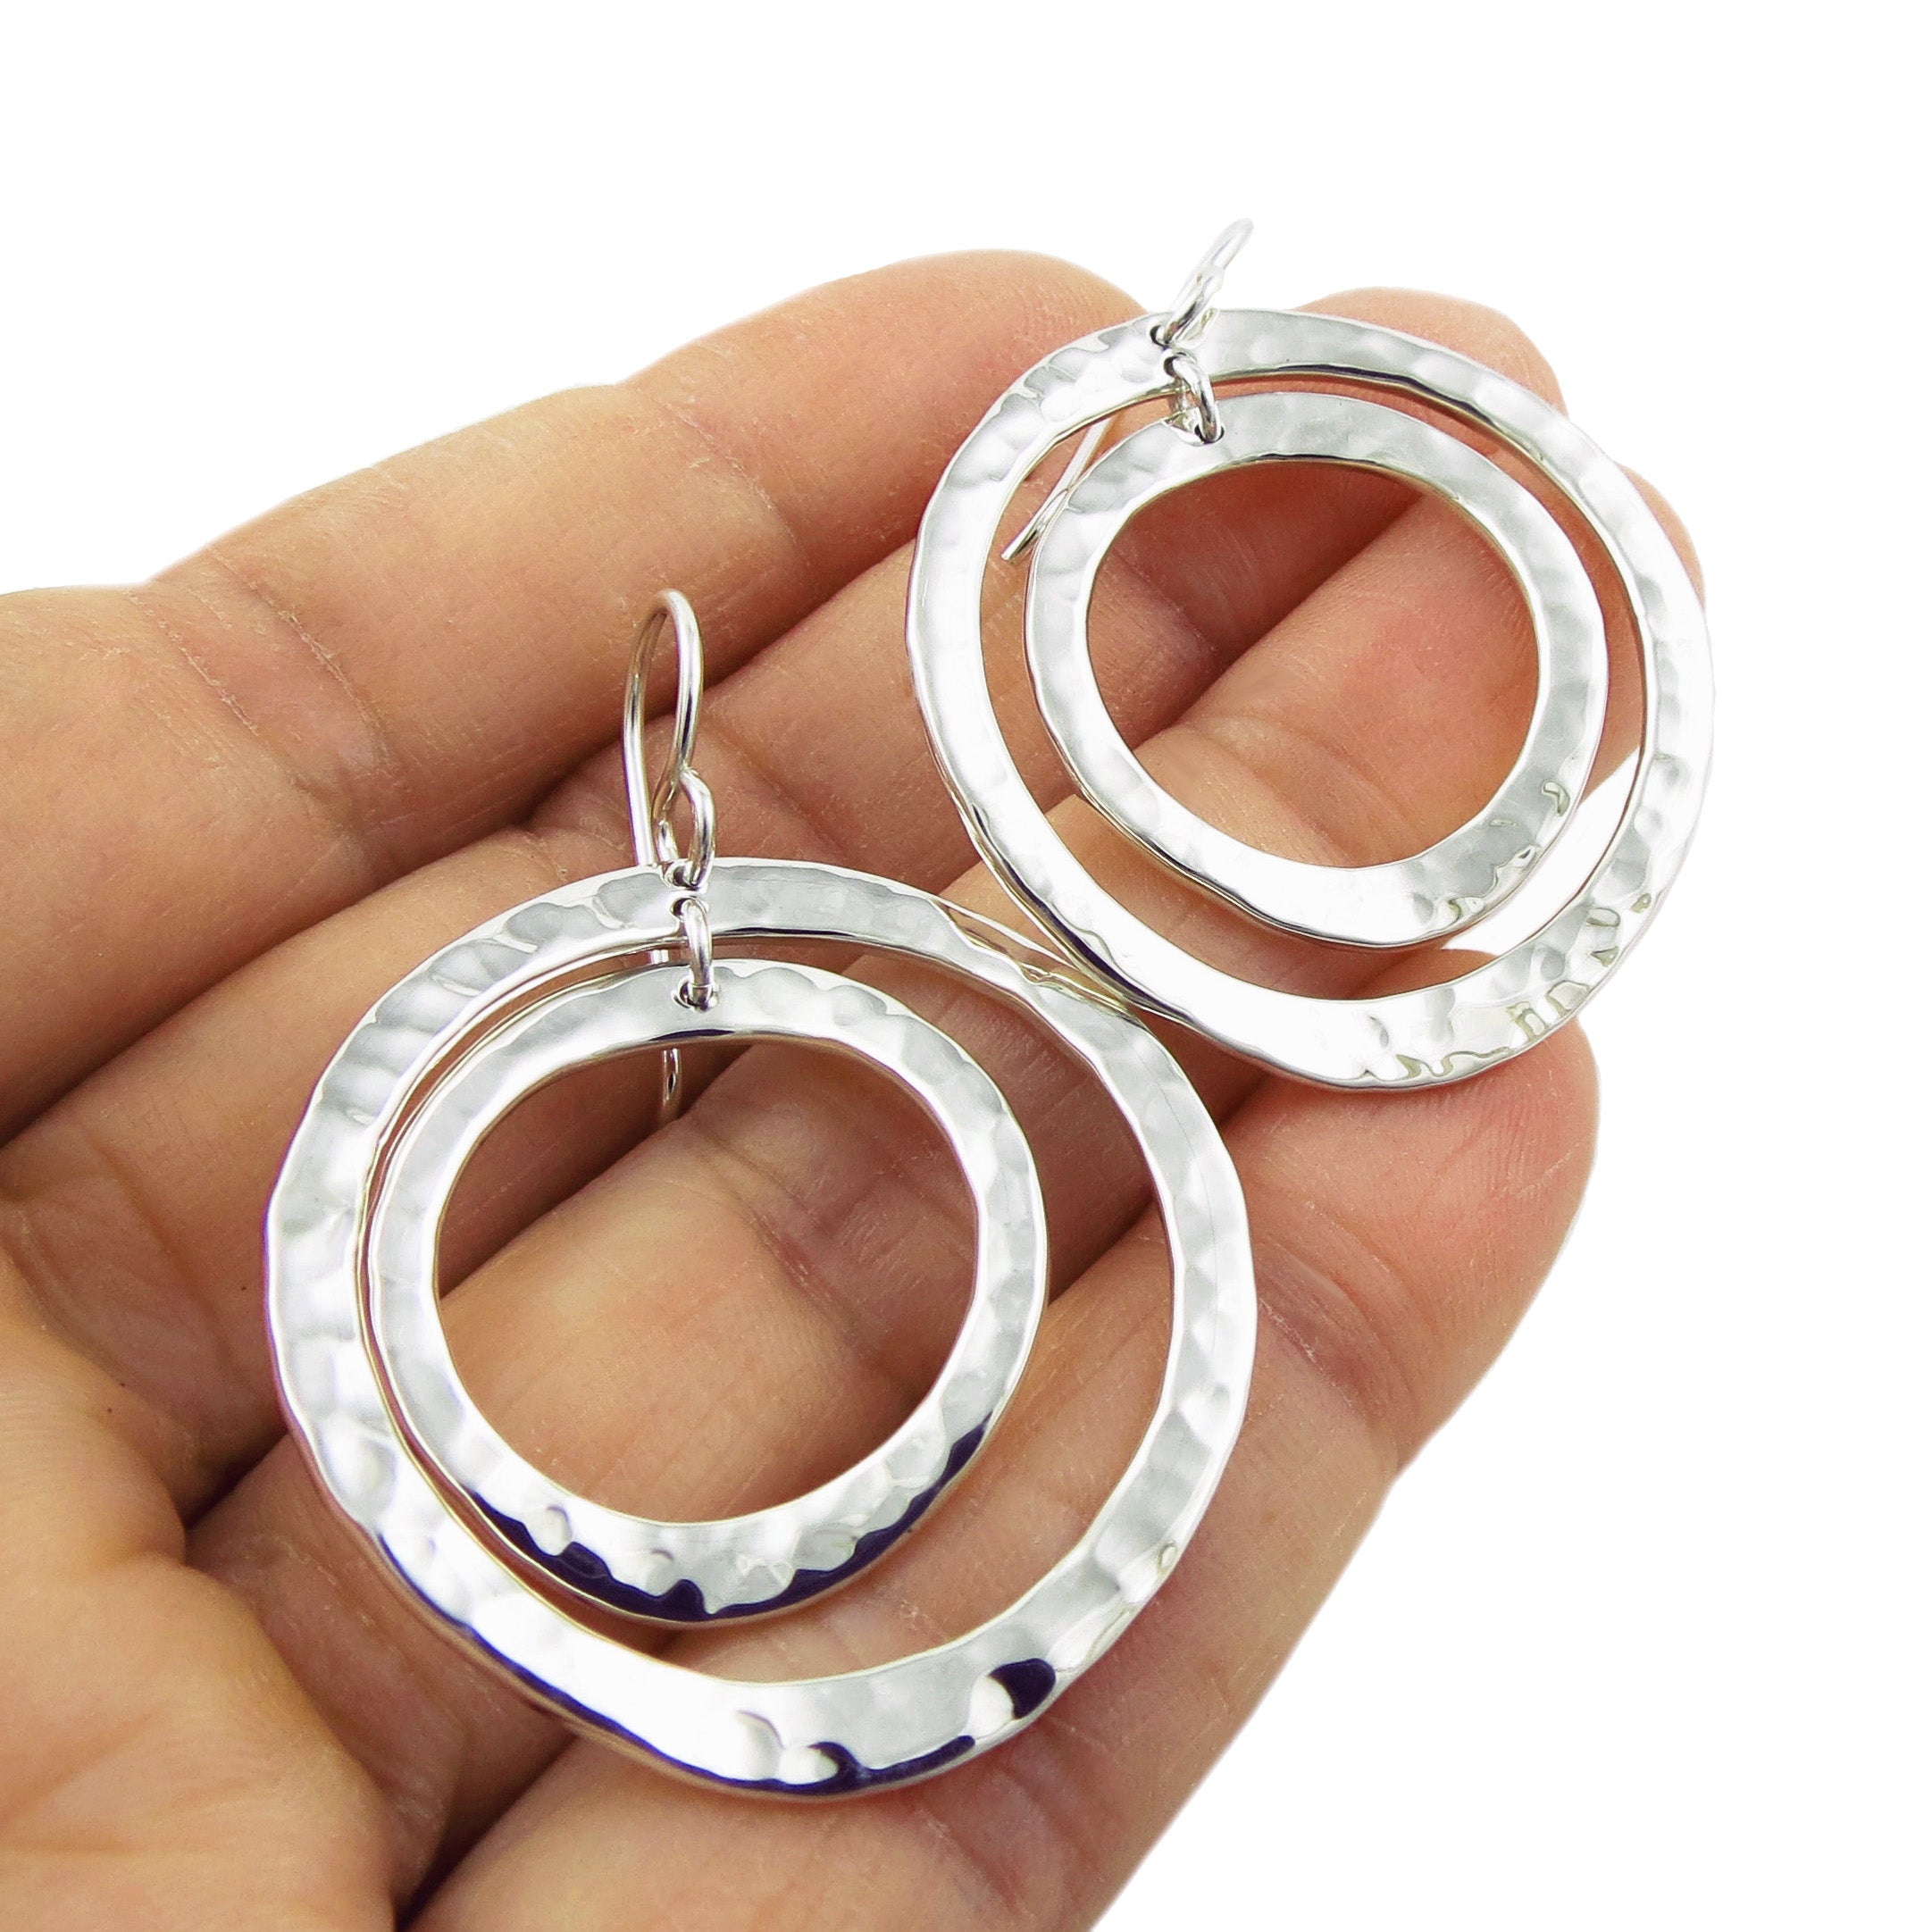 Hammered 925 Sterling Silver Curved Band Earrings